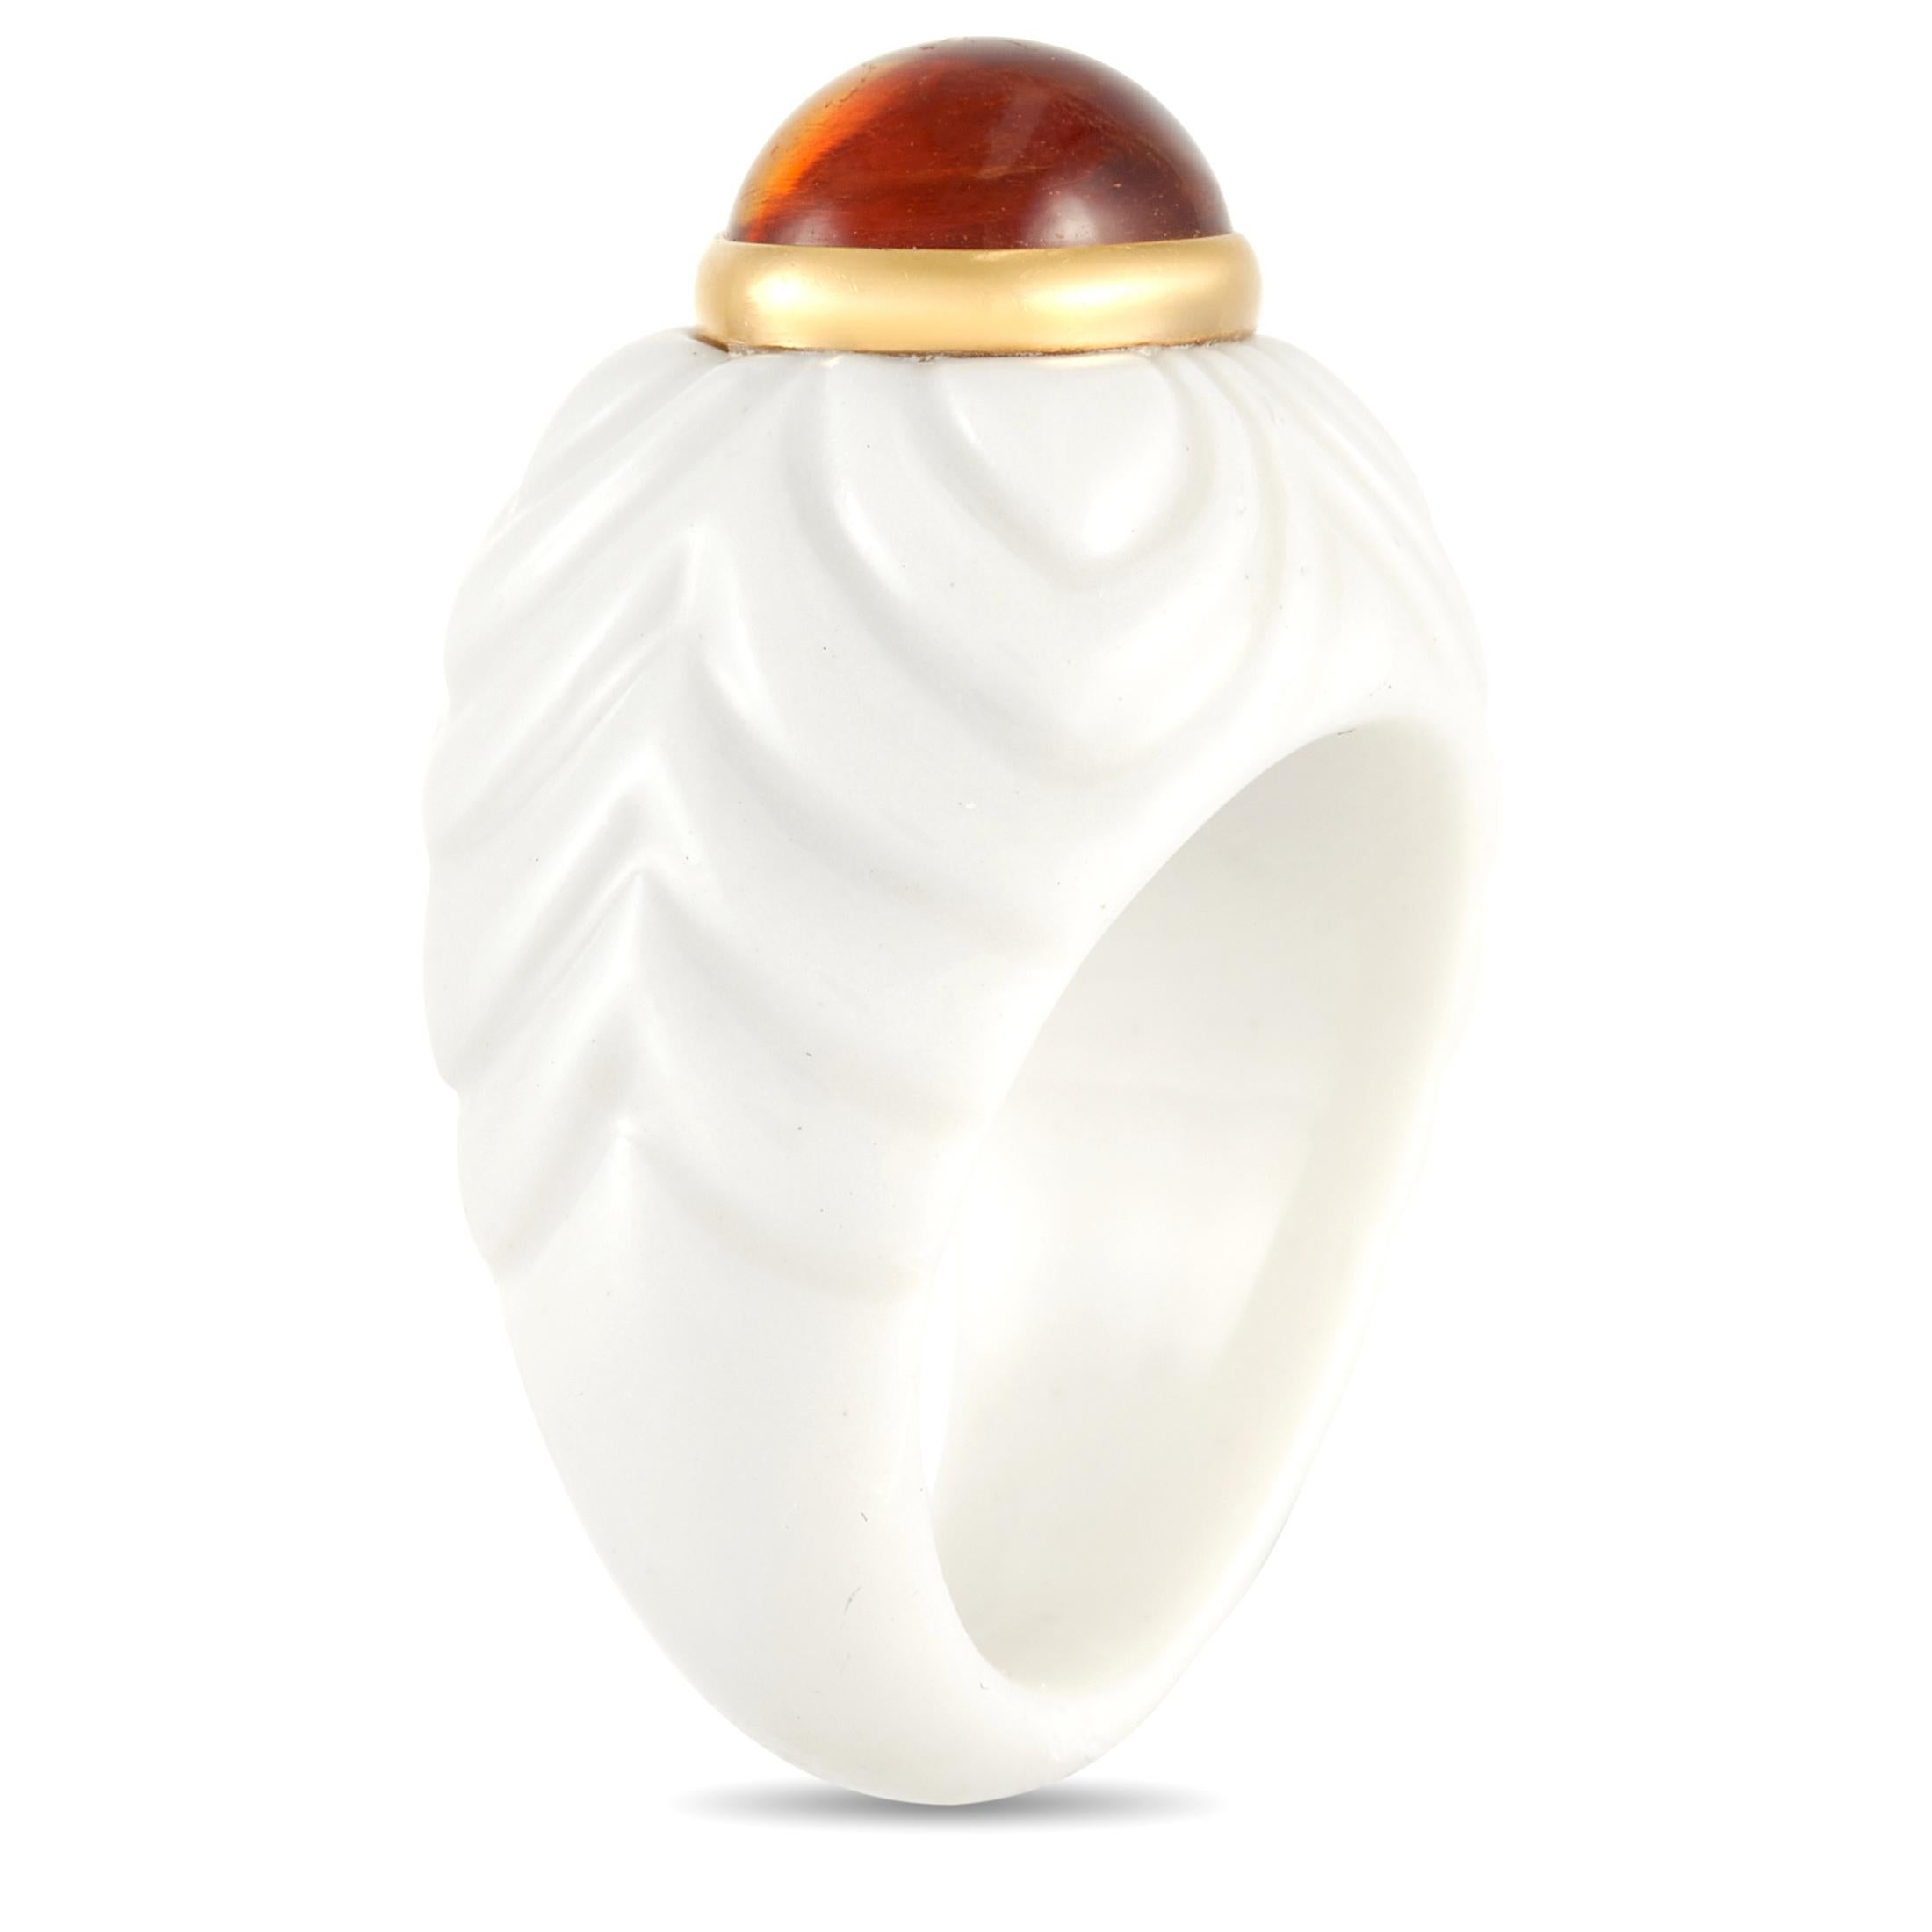 This unique Bvlgari ring is made with a clean white ceramic band in a cascading leaf or petal pattern, the ring is set with an oval citrine bezel set in 18K Yellow Gold. The ring has a band thickness of 7 mm, a top height of 11 mm, and top